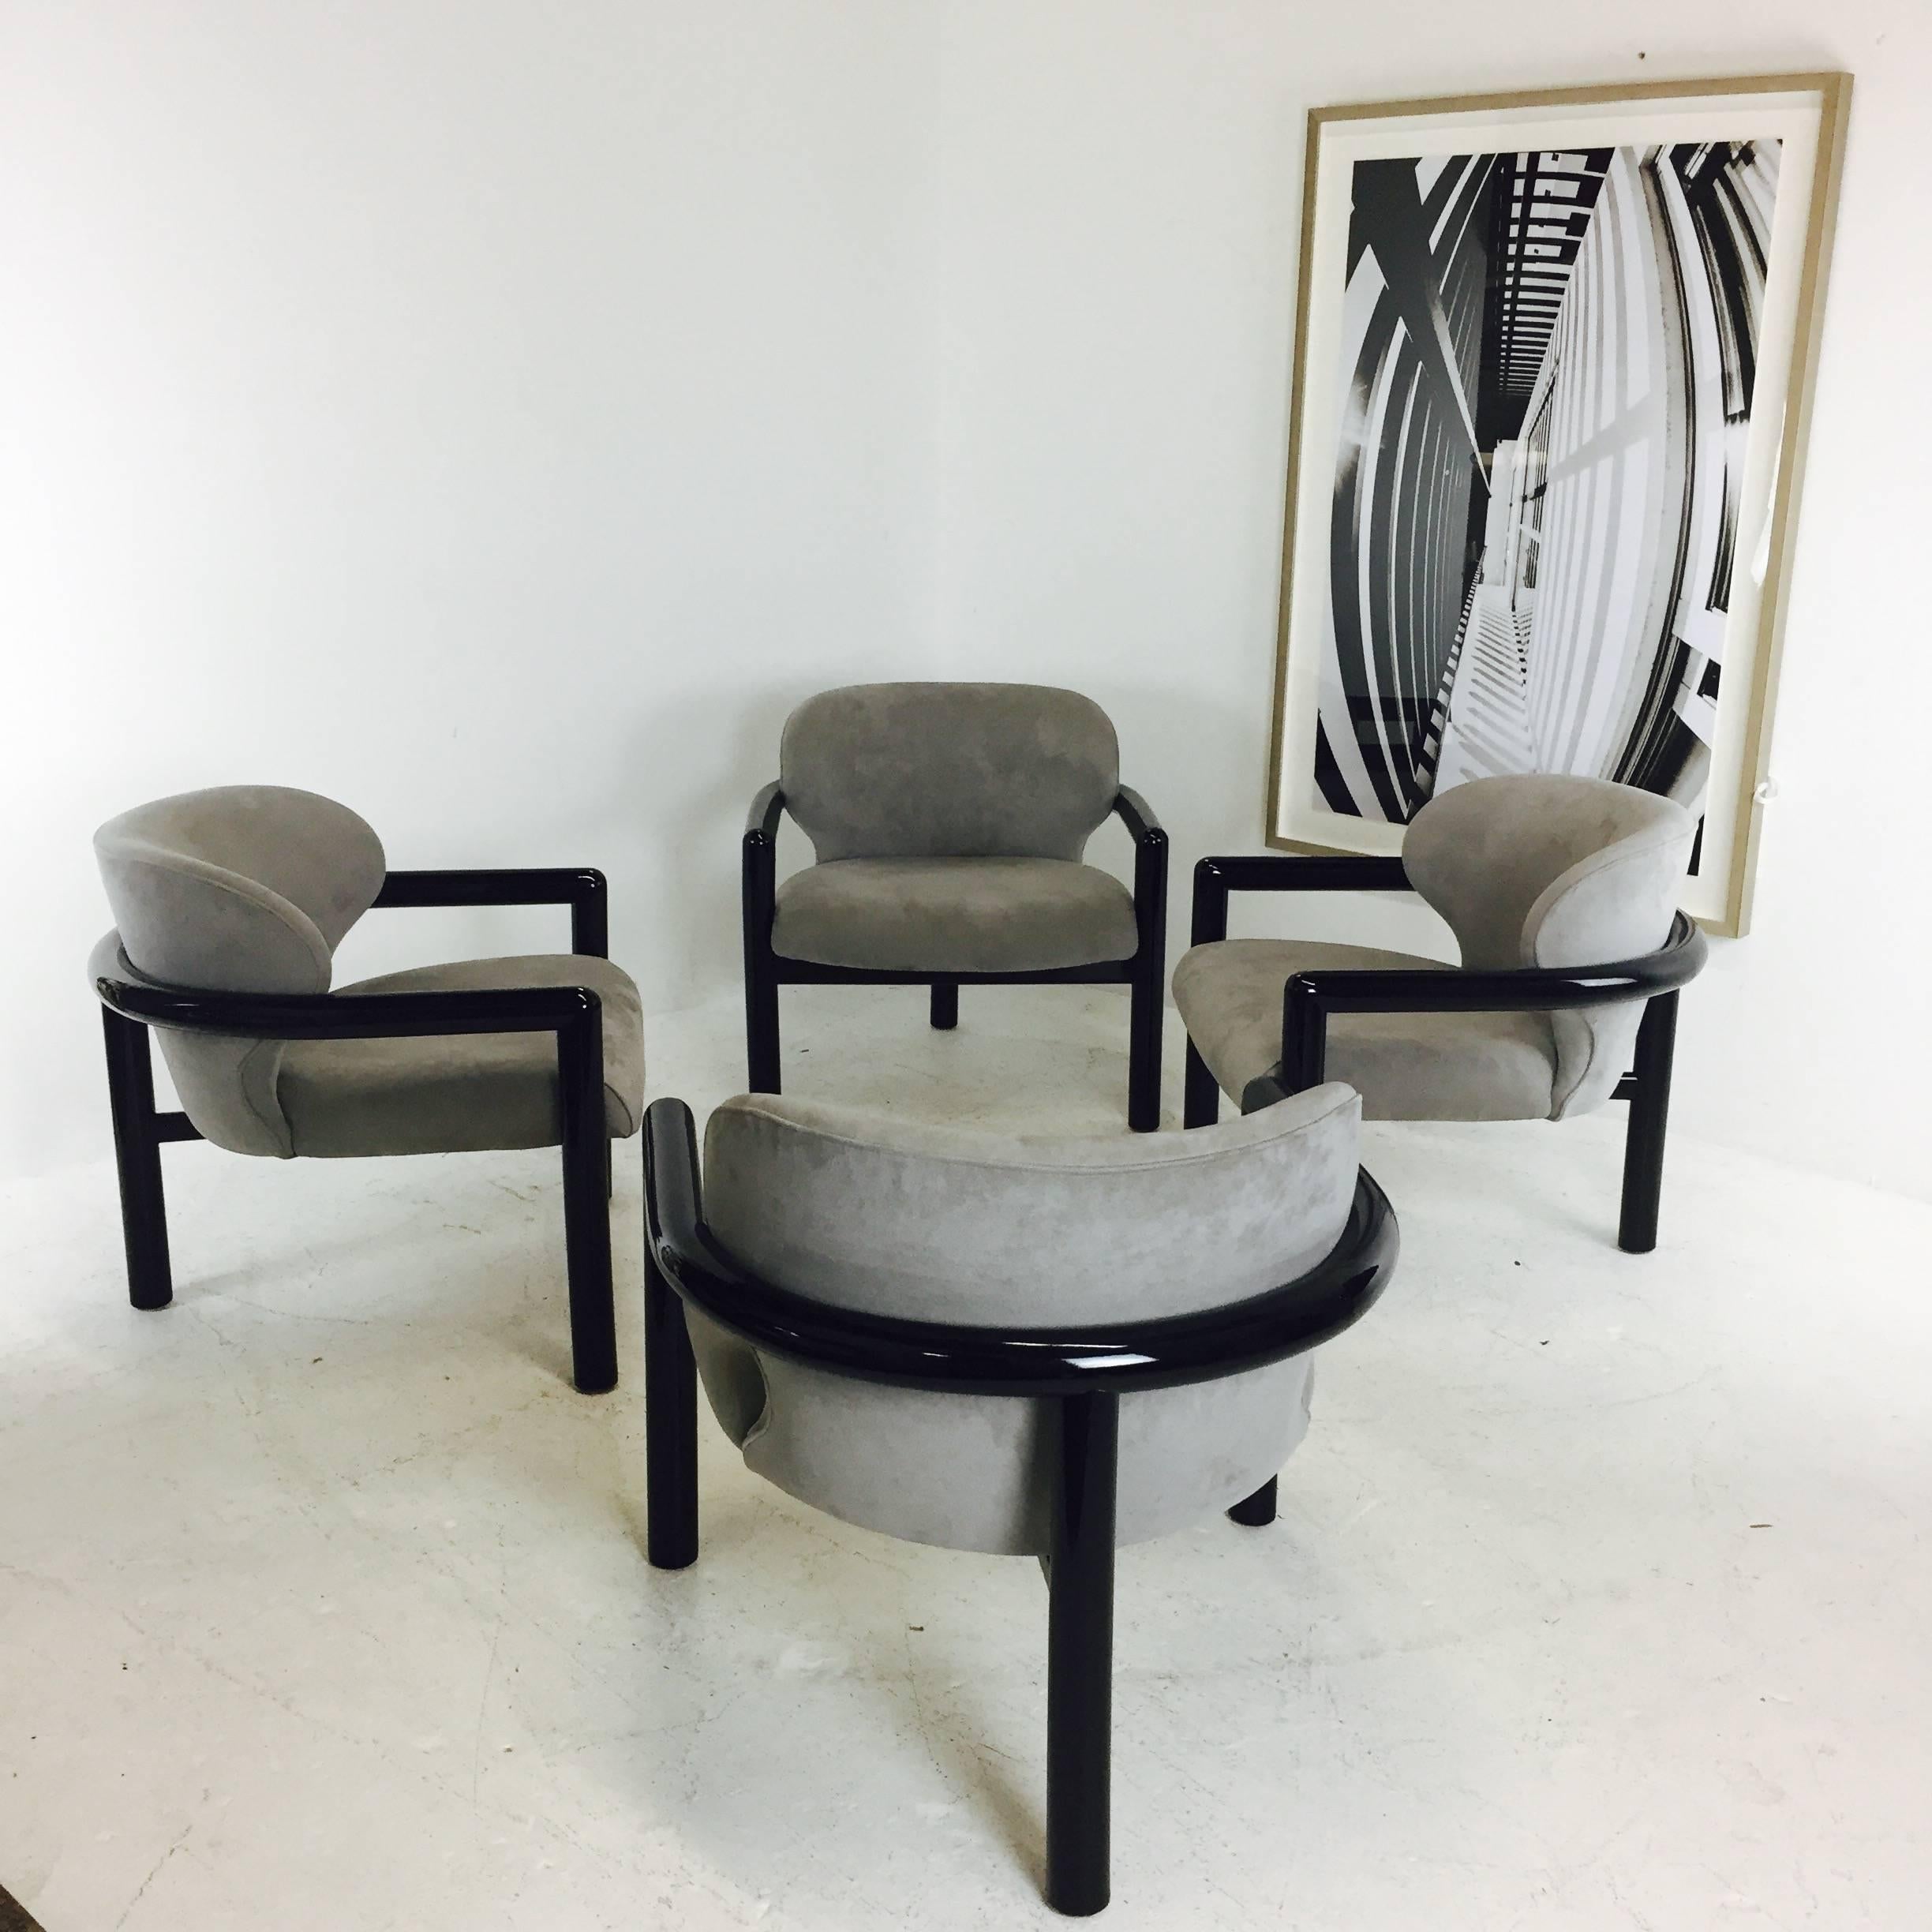 Pair of three legged lounge chairs with a black lacquered finish. Upholstered in a gray ultrasuede. In good vintage condition with minimal signs of wear, circa 1980s

Two pairs available

dimensions: 29